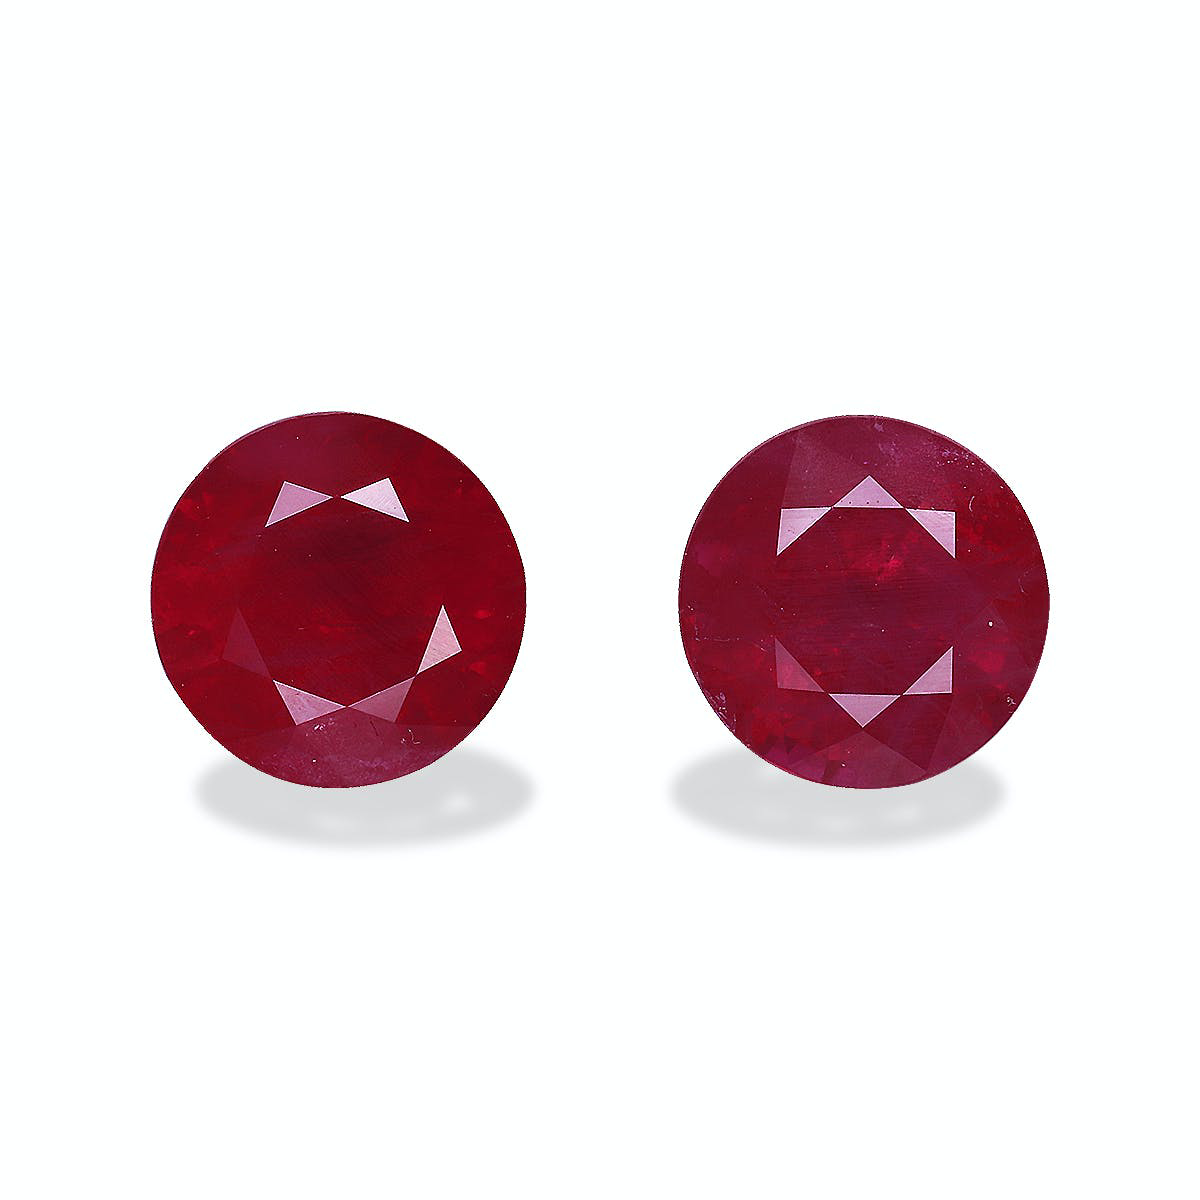 Picture of Rose Red Burma Ruby 3.57ct - 7mm Pair (WC8941-21)